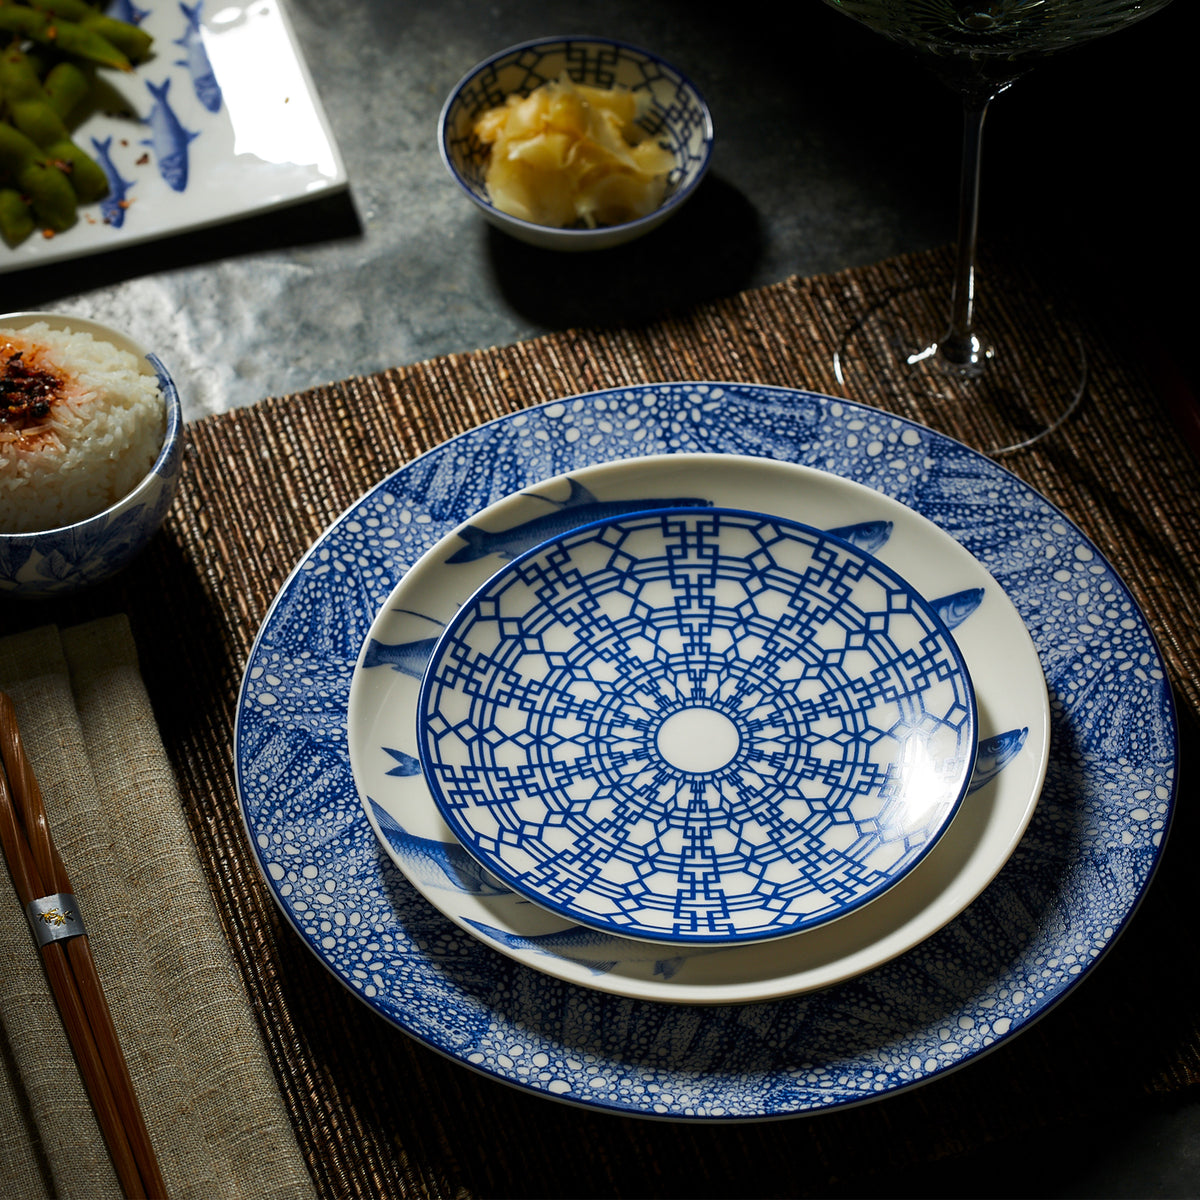 A dining setup featuring intricately patterned blue and white Caskata Artisanal Home Newport Small Plates, reminiscent of the Newport Garden Gate design, placed on a mat. A bowl of rice, a smaller dish with pickles, chopsticks, and part of a glass are visible in the background.